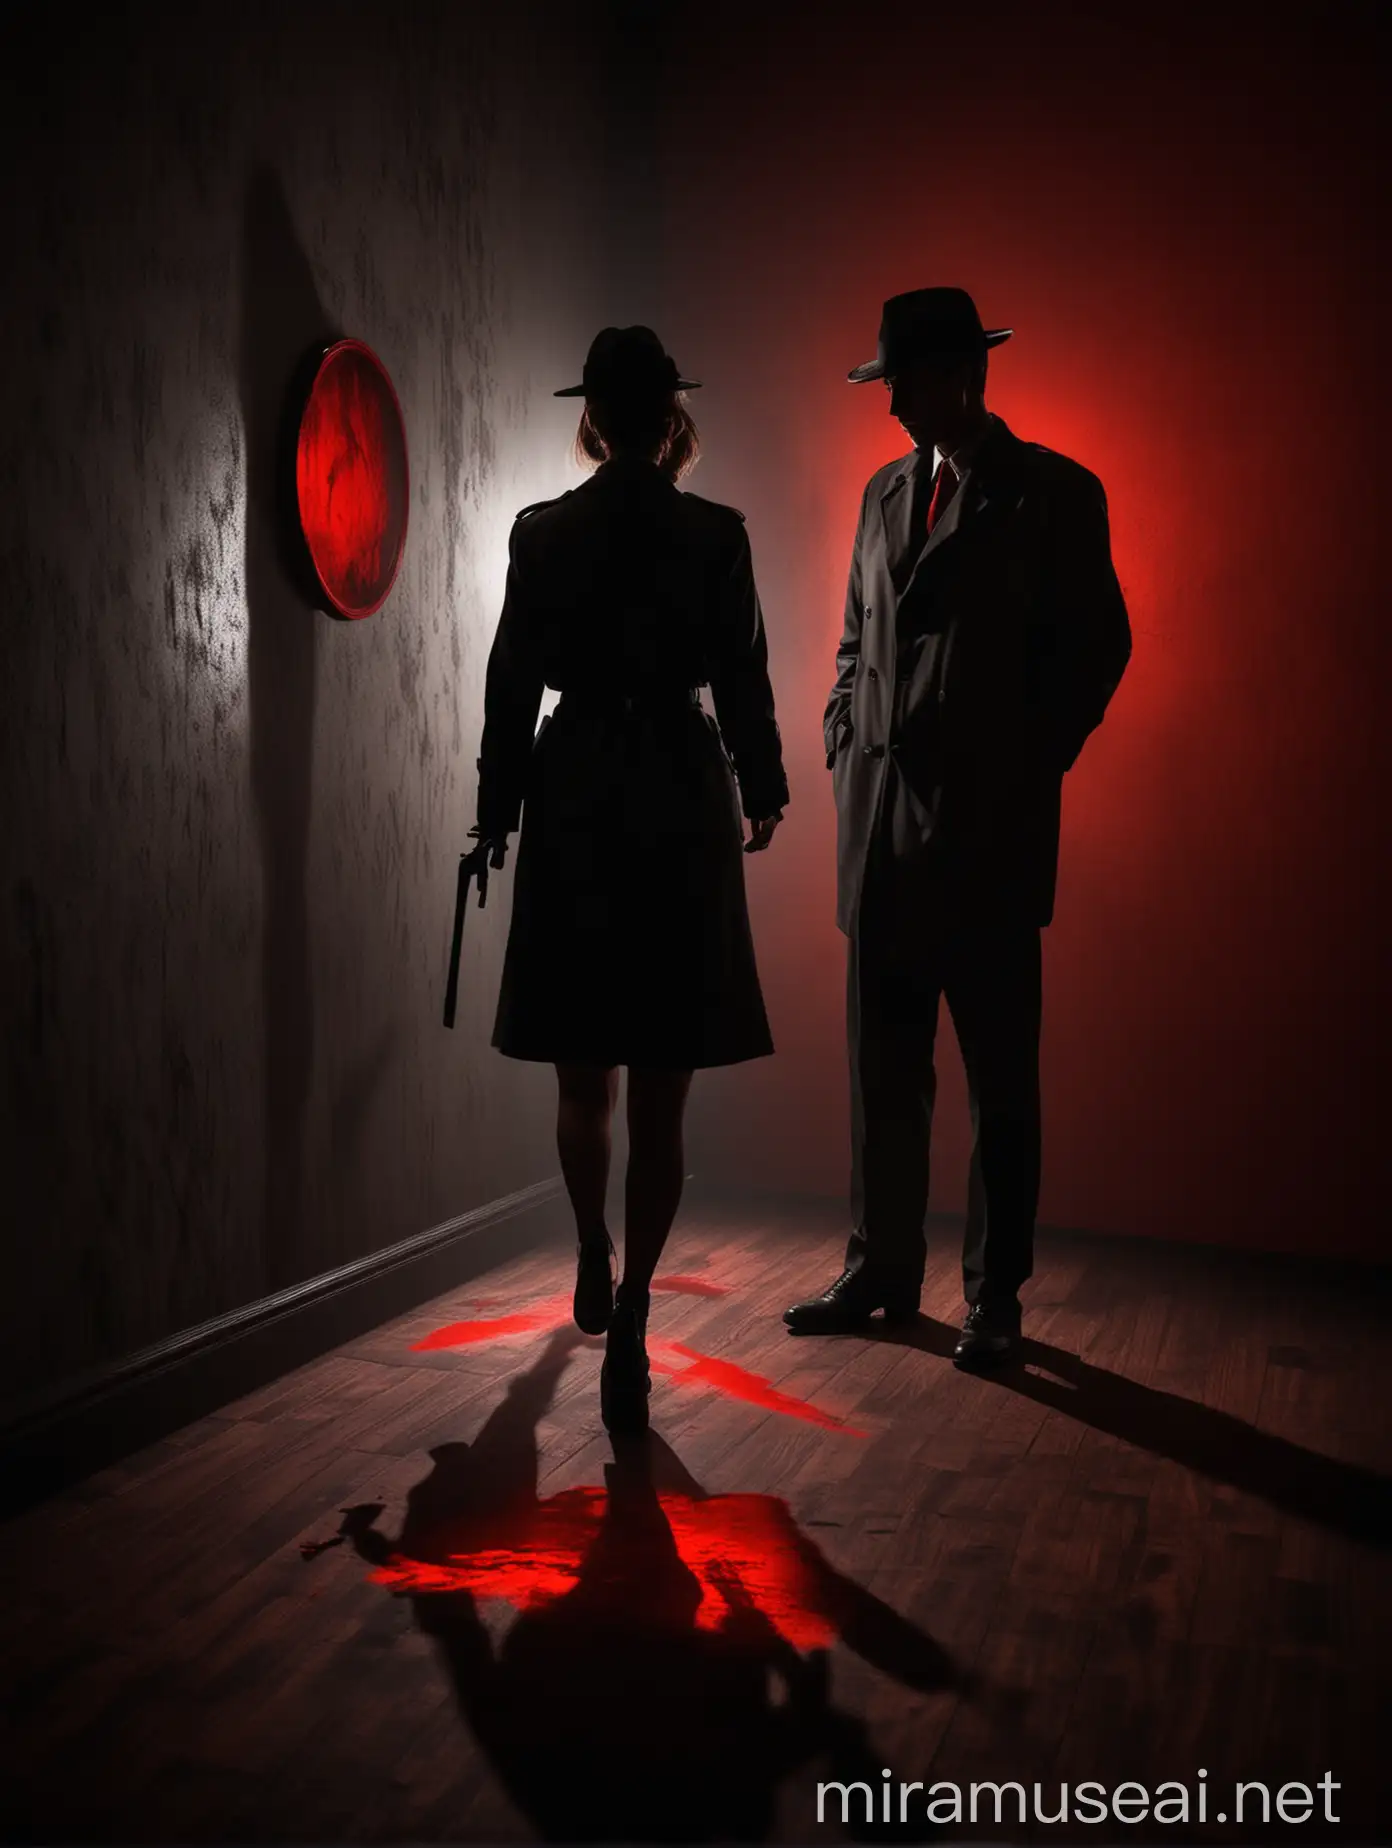 Mysterious Detective Lady Investigating Crime Scene with Shadowy Figure